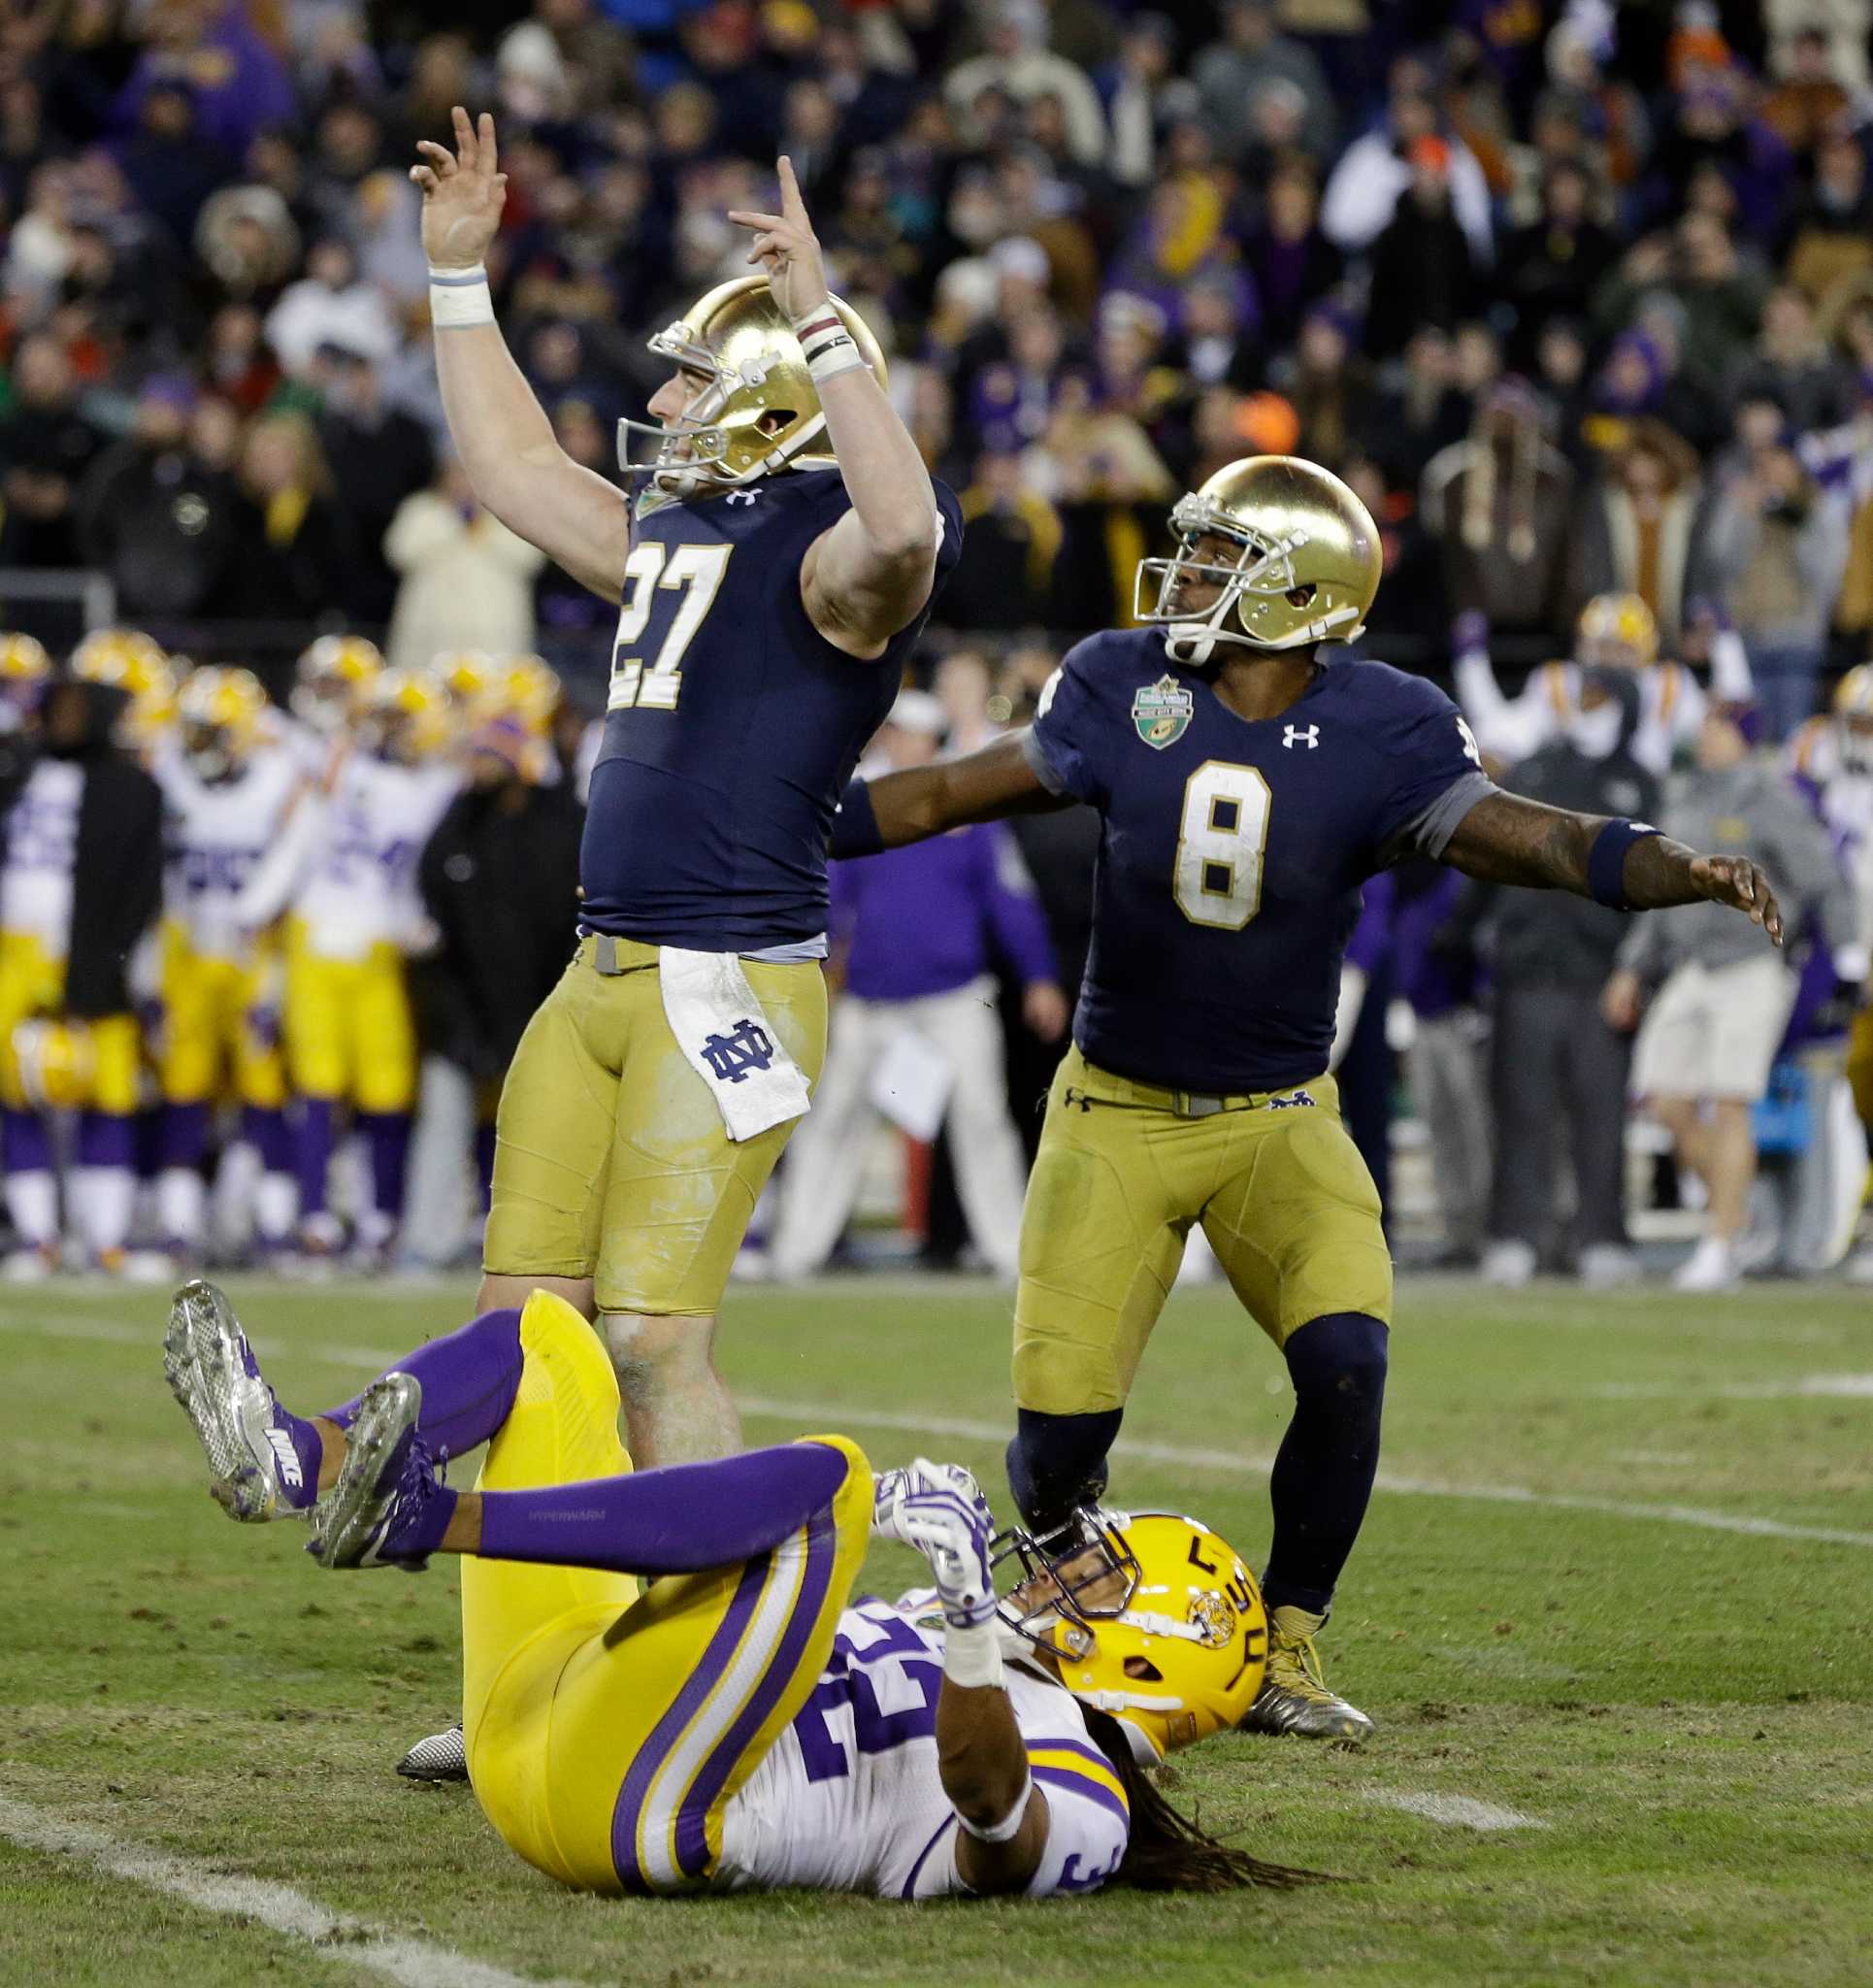 Notre Dame sneaks win over LSU with lastsecond FG